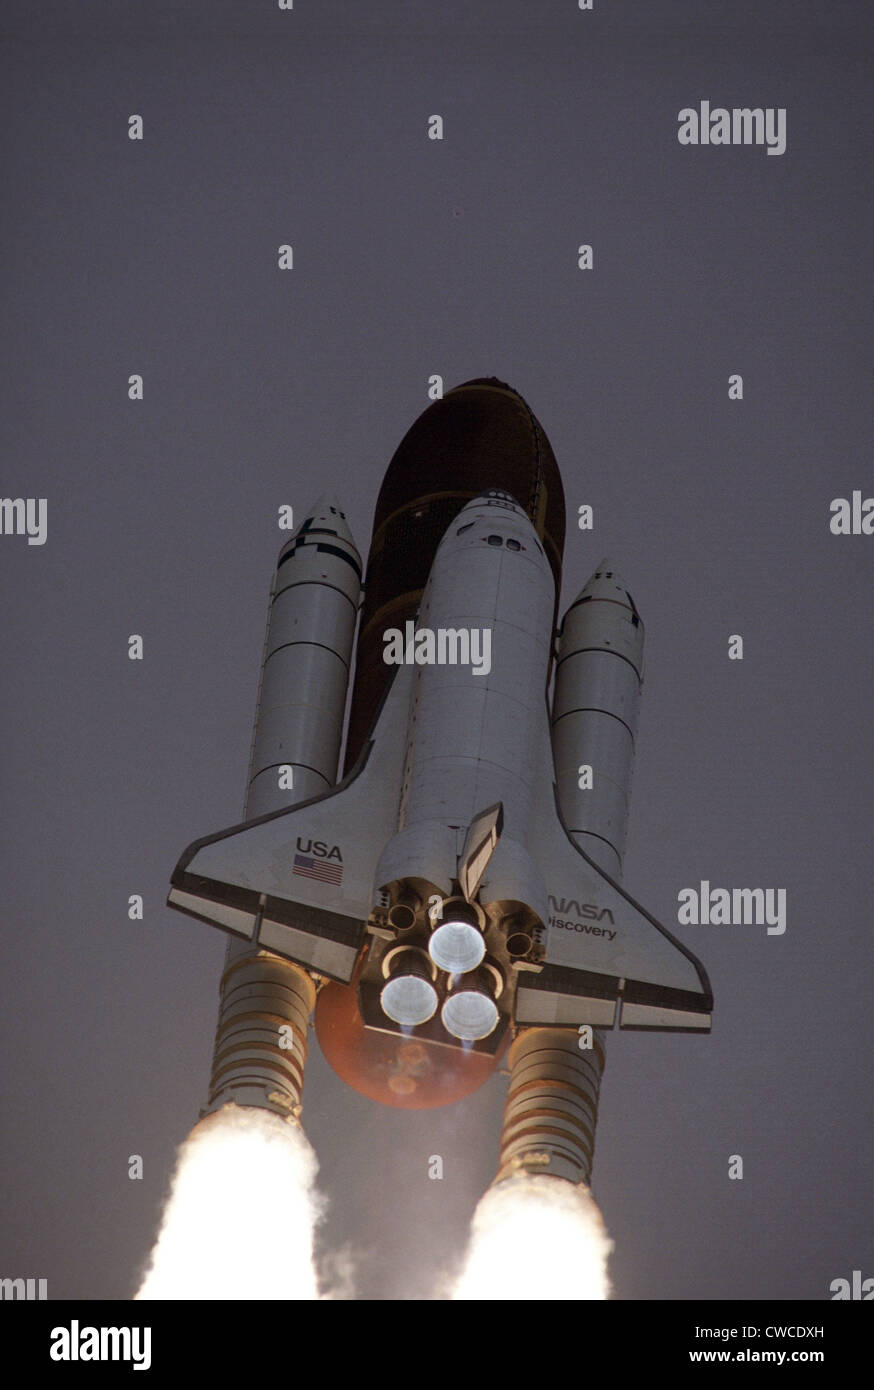 Space Shuttle Discovery launched with Hubble Space Telescope in its cargo bay. April 24, 1990. Stock Photo